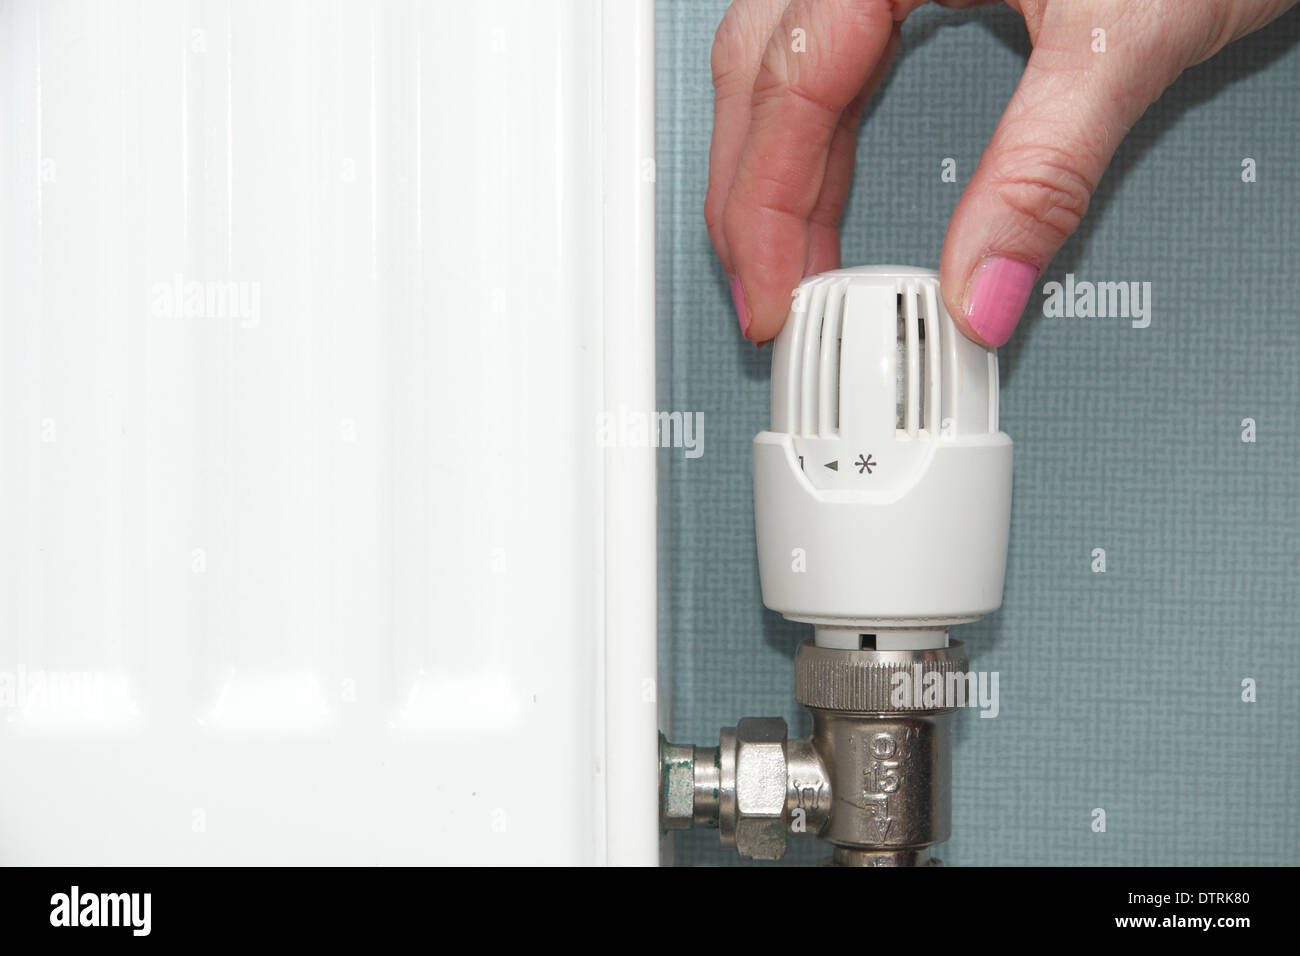 Woman turning thermostatic/radiator/ valve up/down on central heating system in domestic home, England, UK Stock Photo